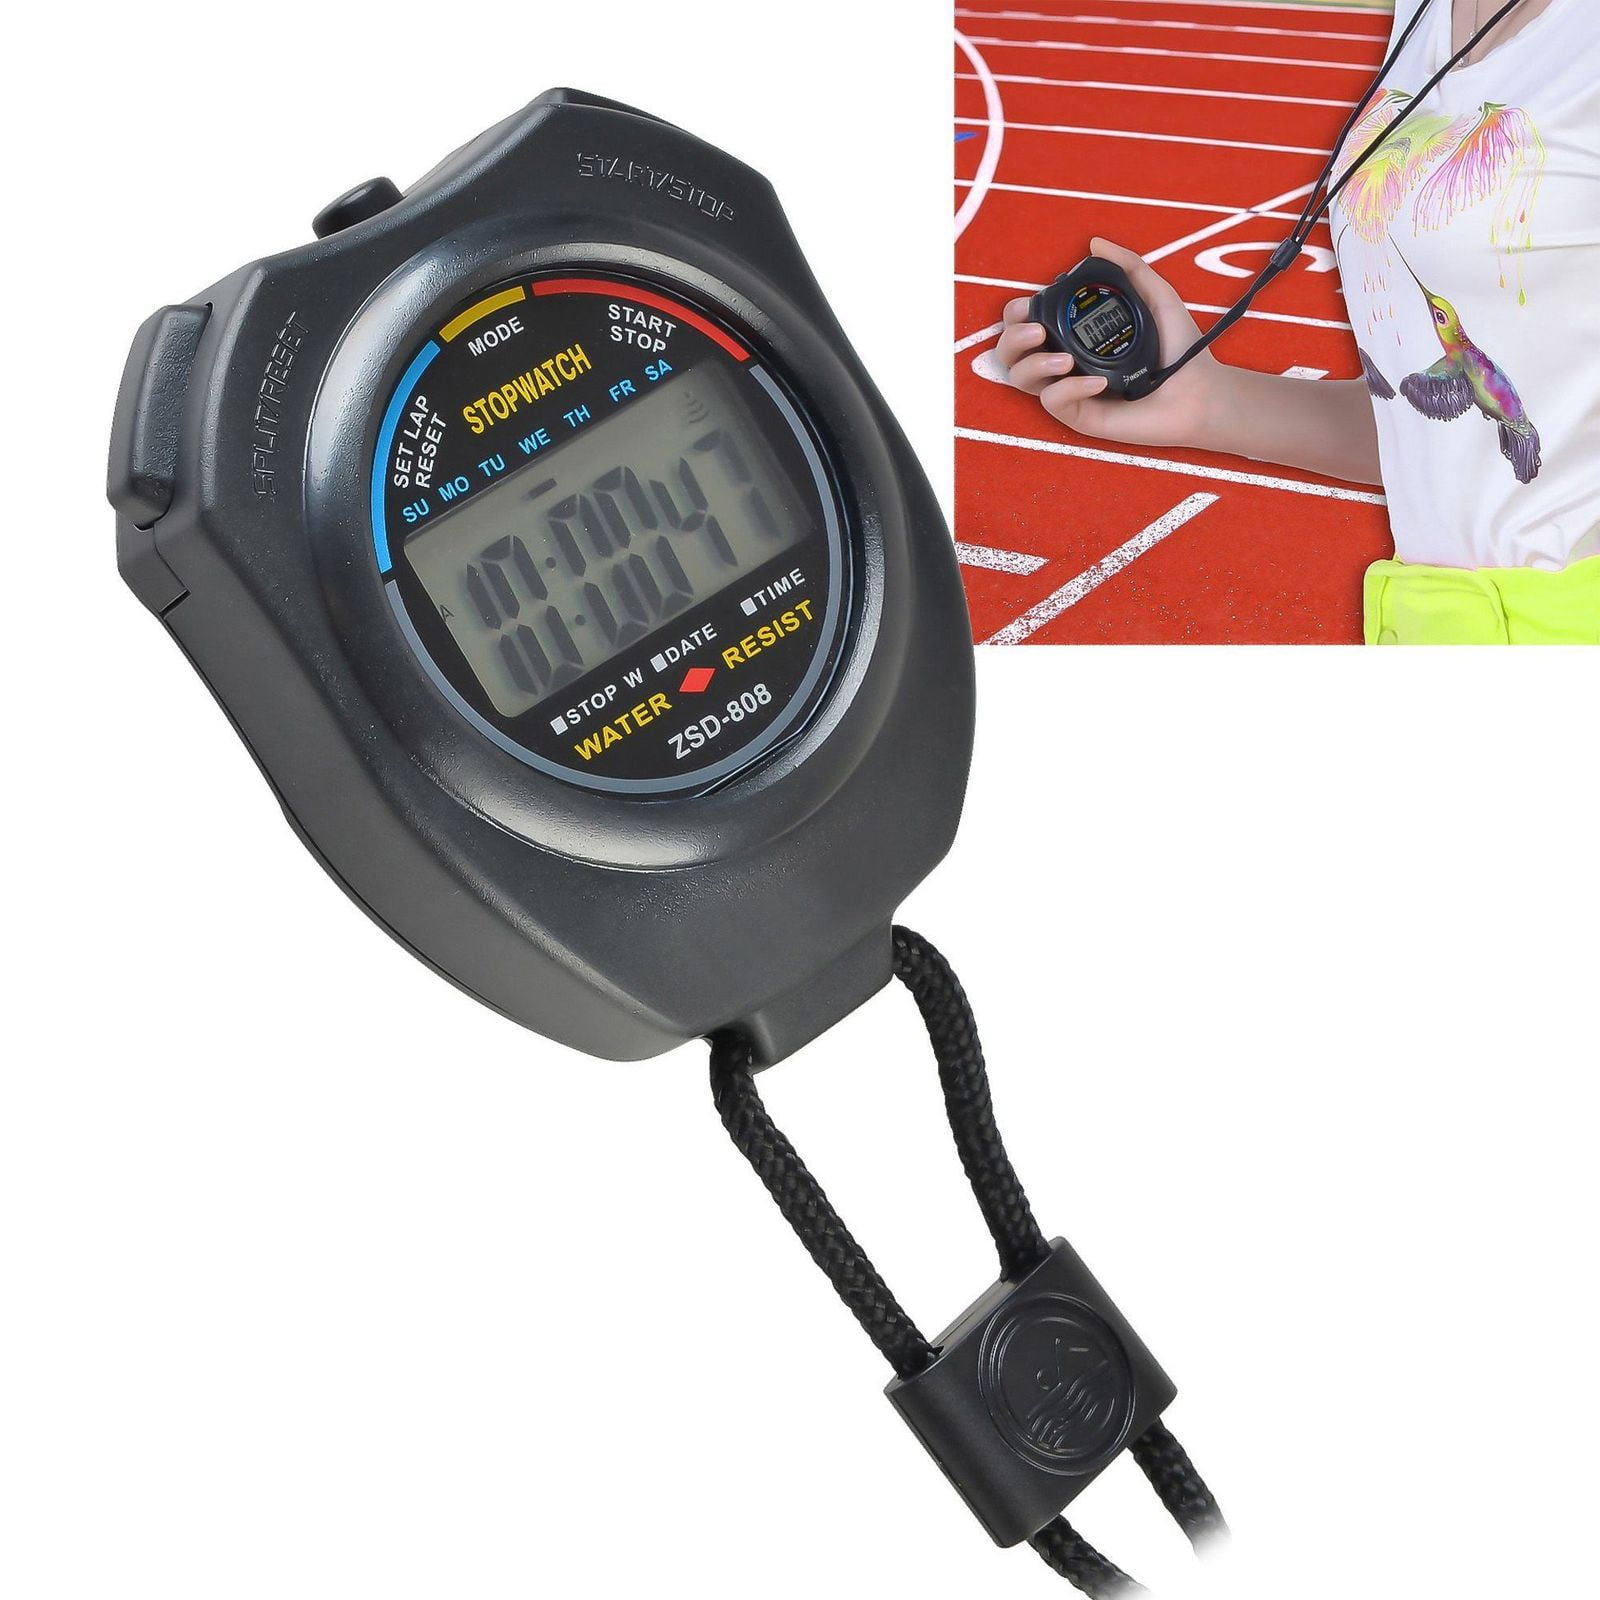 Lot4 Electronic LCD Digital Sport Stopwatch Time Alarm Counter Chronograph USA 